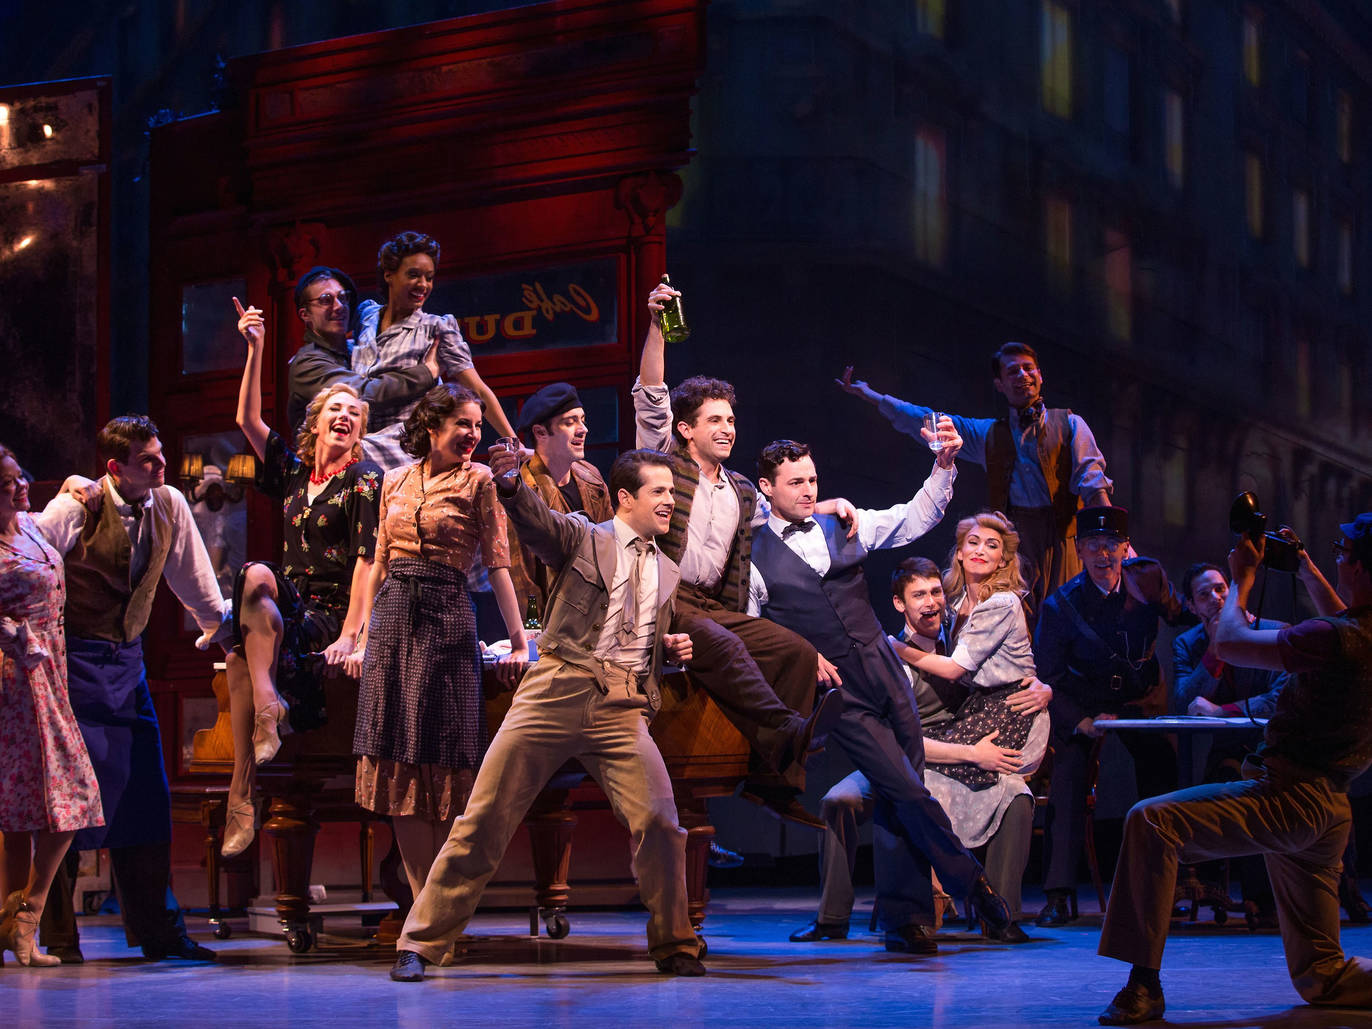 List of upcoming Broadway shows to book tickets in advance